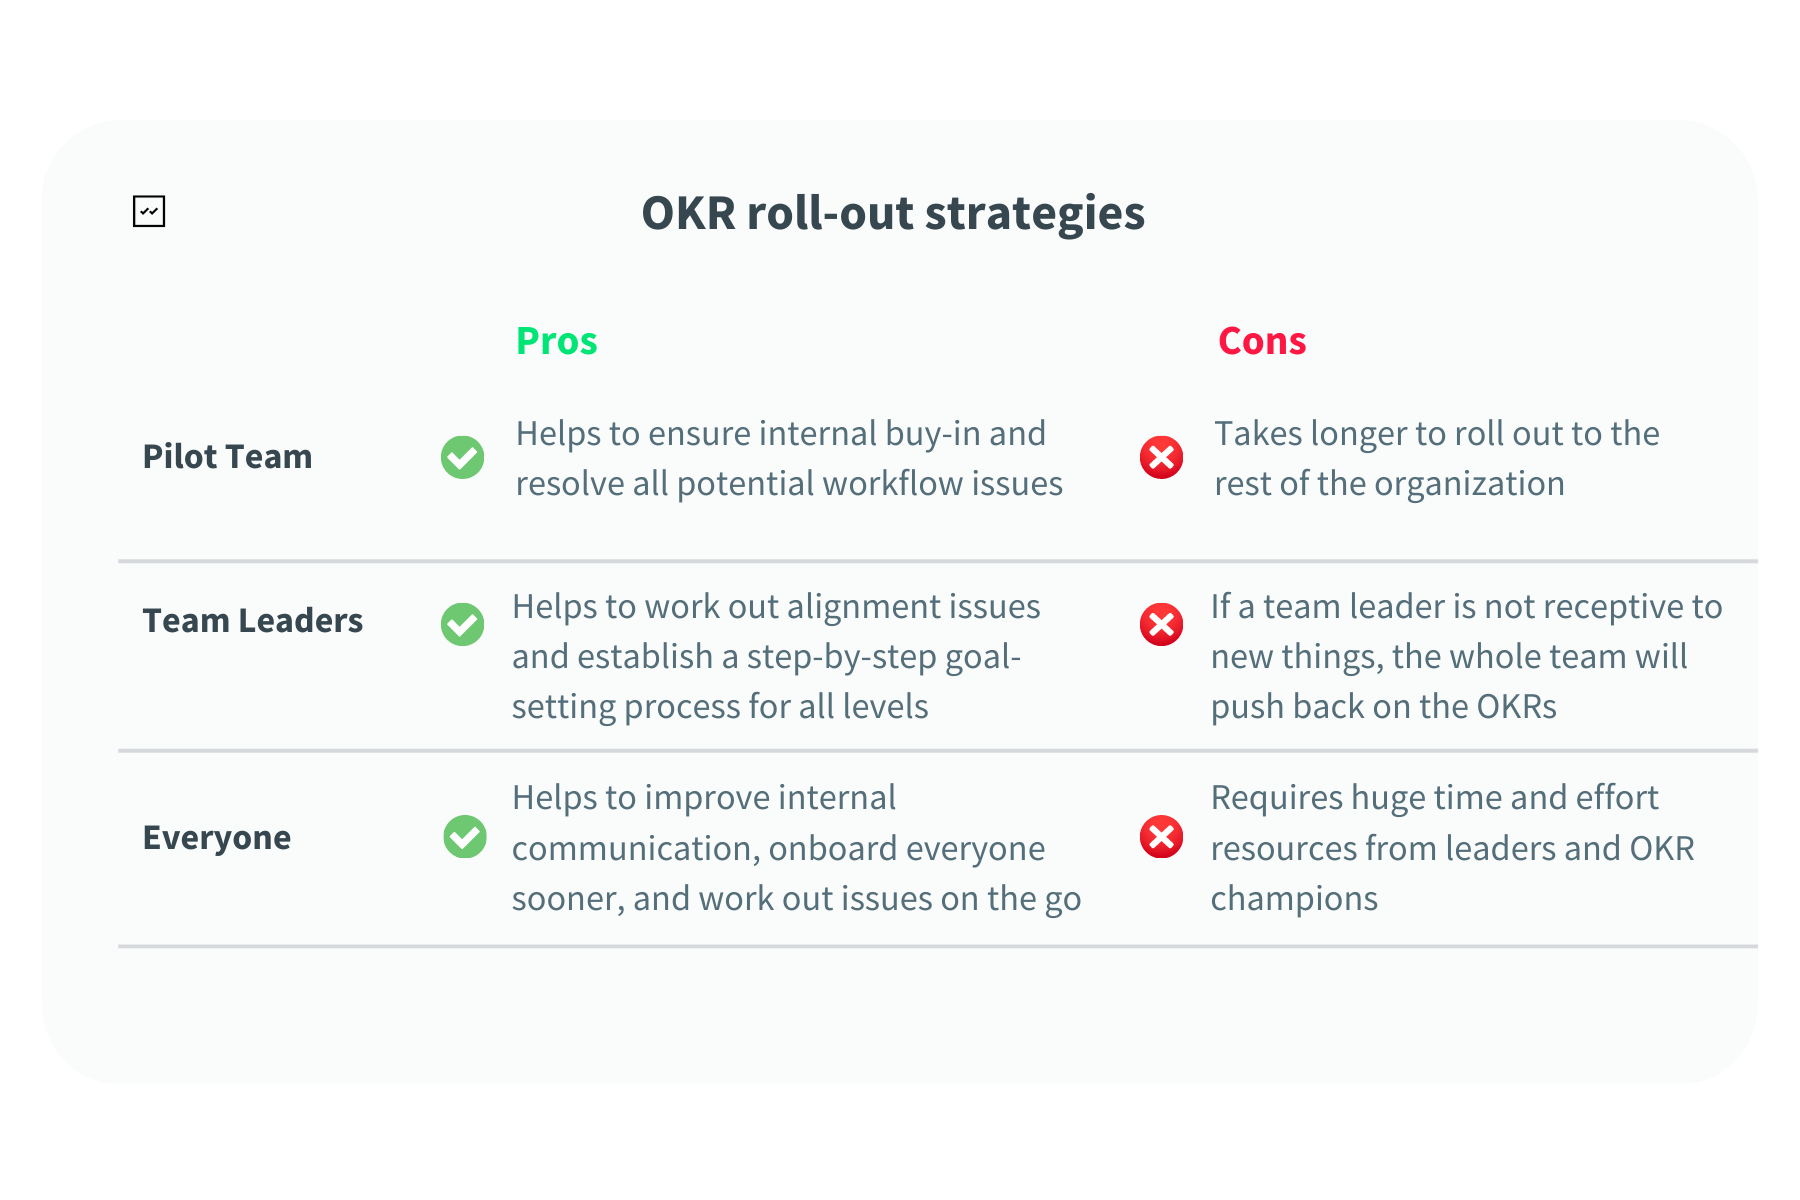 Pros and Cons list of 3 OKR roll-out strategies - best options for different team sizes